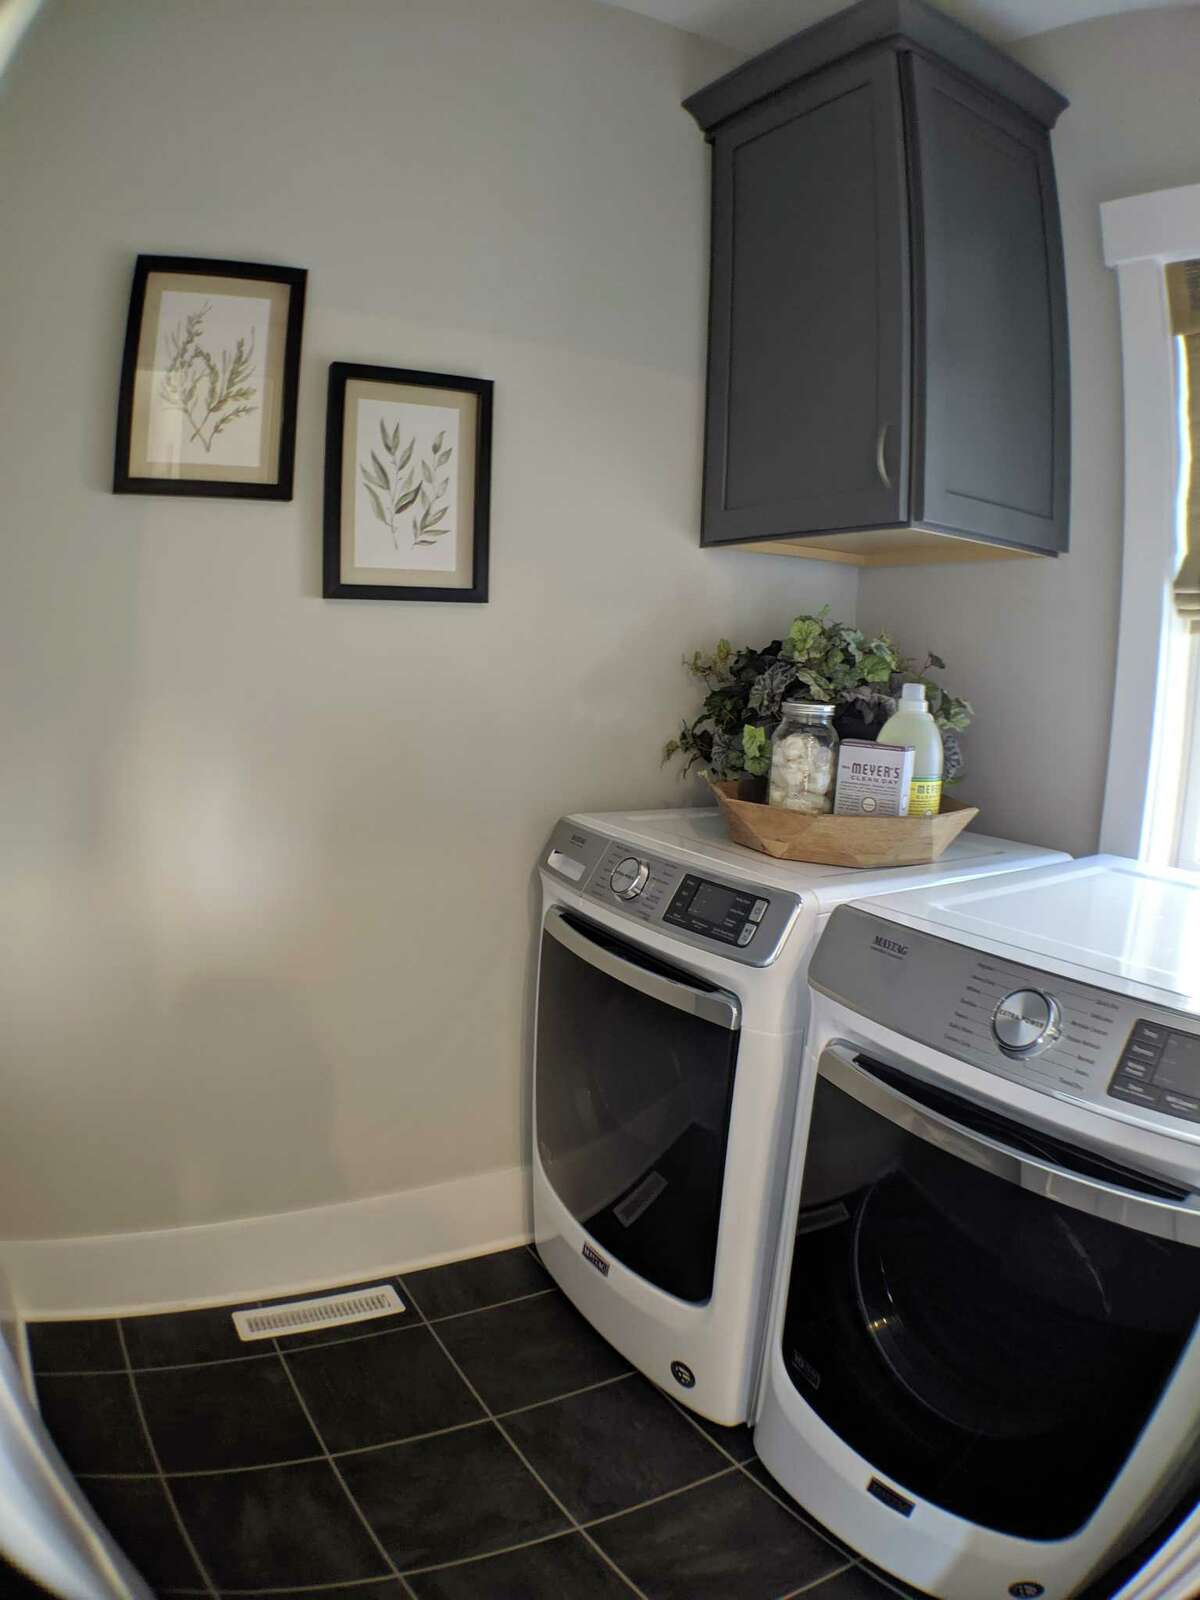 The laundry room inside a house by Bella Homes on the 2019 Saratoga County Showcase of Homes. (Photo by Eli Conklin)